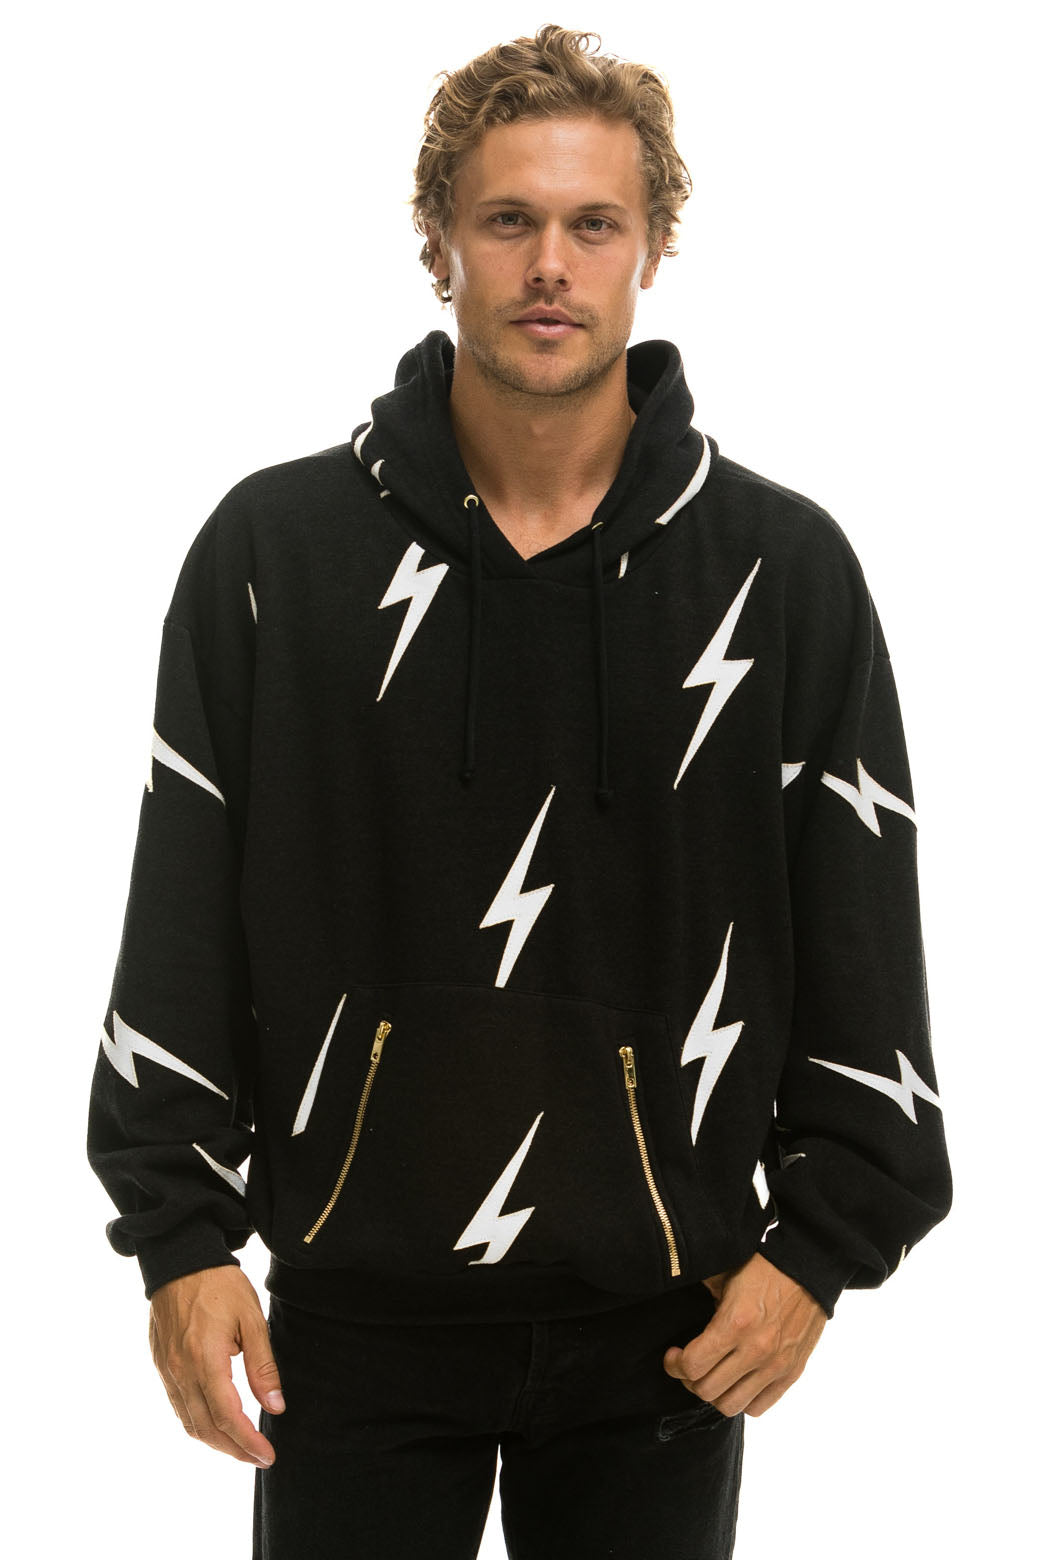 BOLT STITCH REPEAT RELAXED PULLOVER HOODIE WITH POCKET ZIPPERS - BLACK // WHITE Hoodie Aviator Nation 